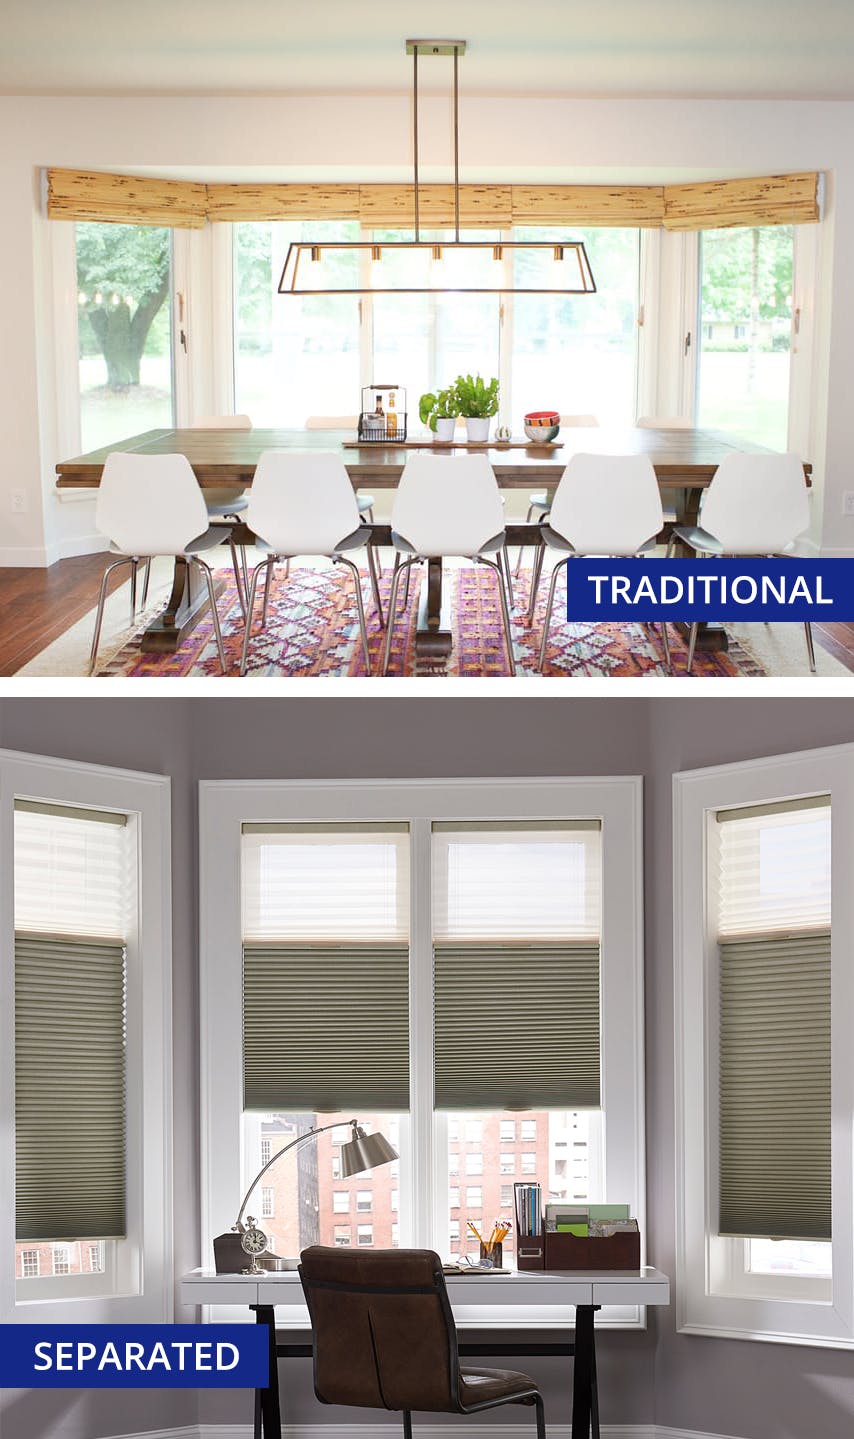 Between-the-Glass Blinds & Shades for Windows